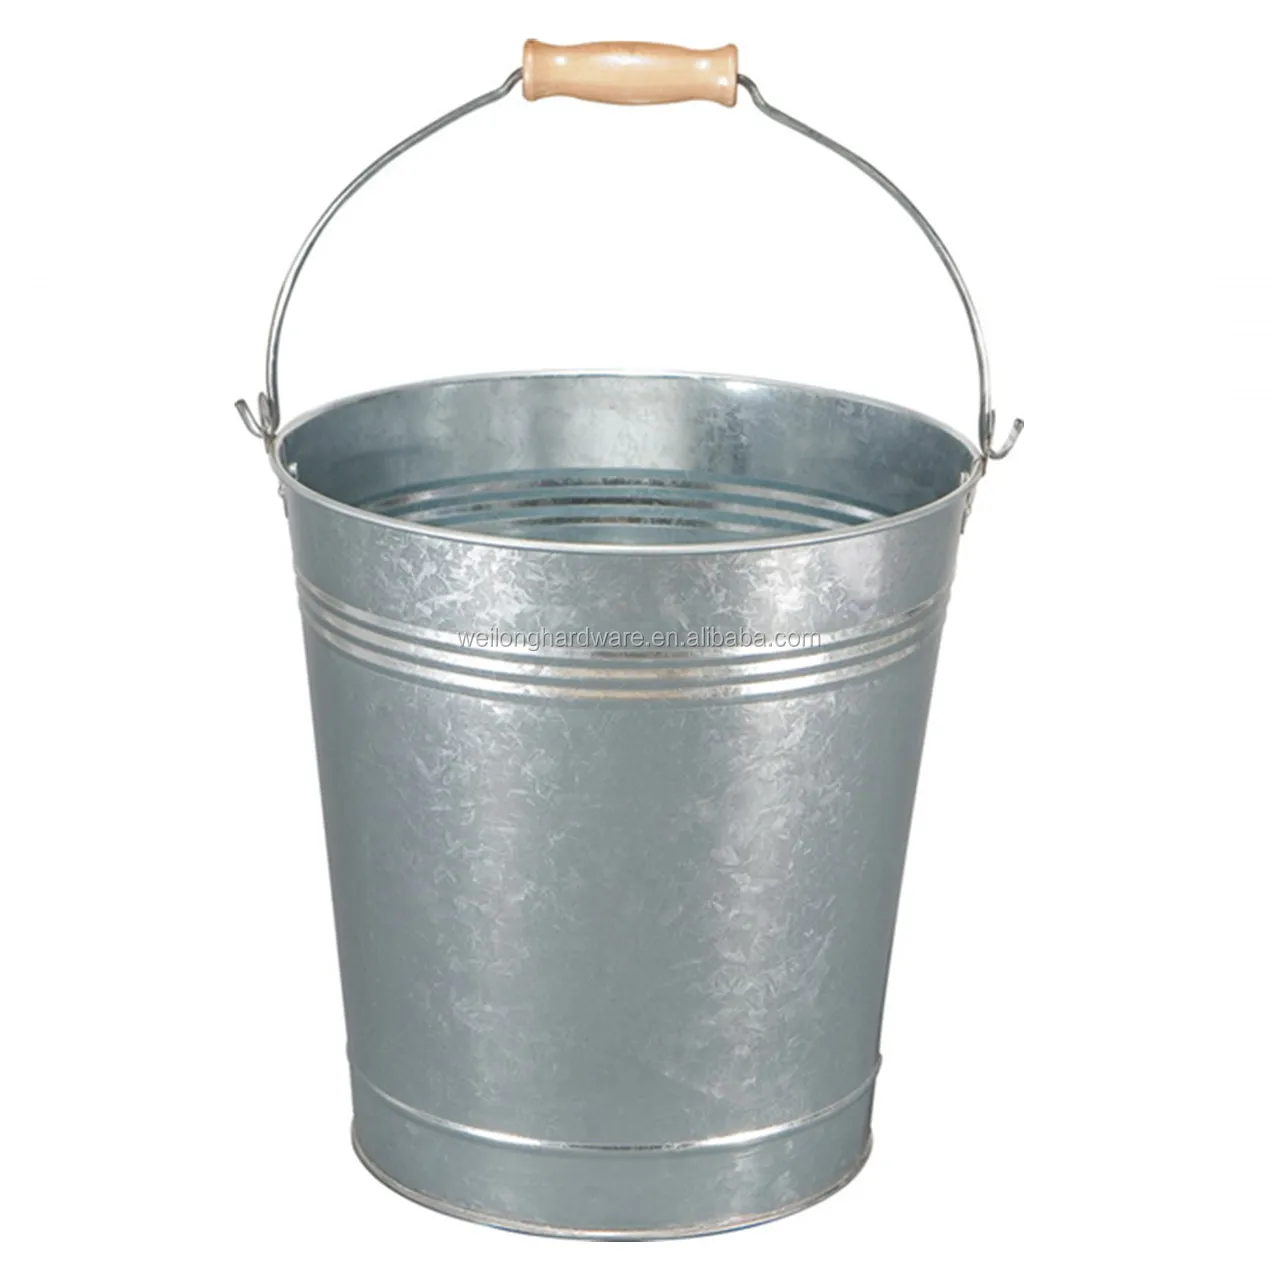 10L Litre Bucket Galvanised Metal Heavy Duty Wooden Handle New By Home Discount 